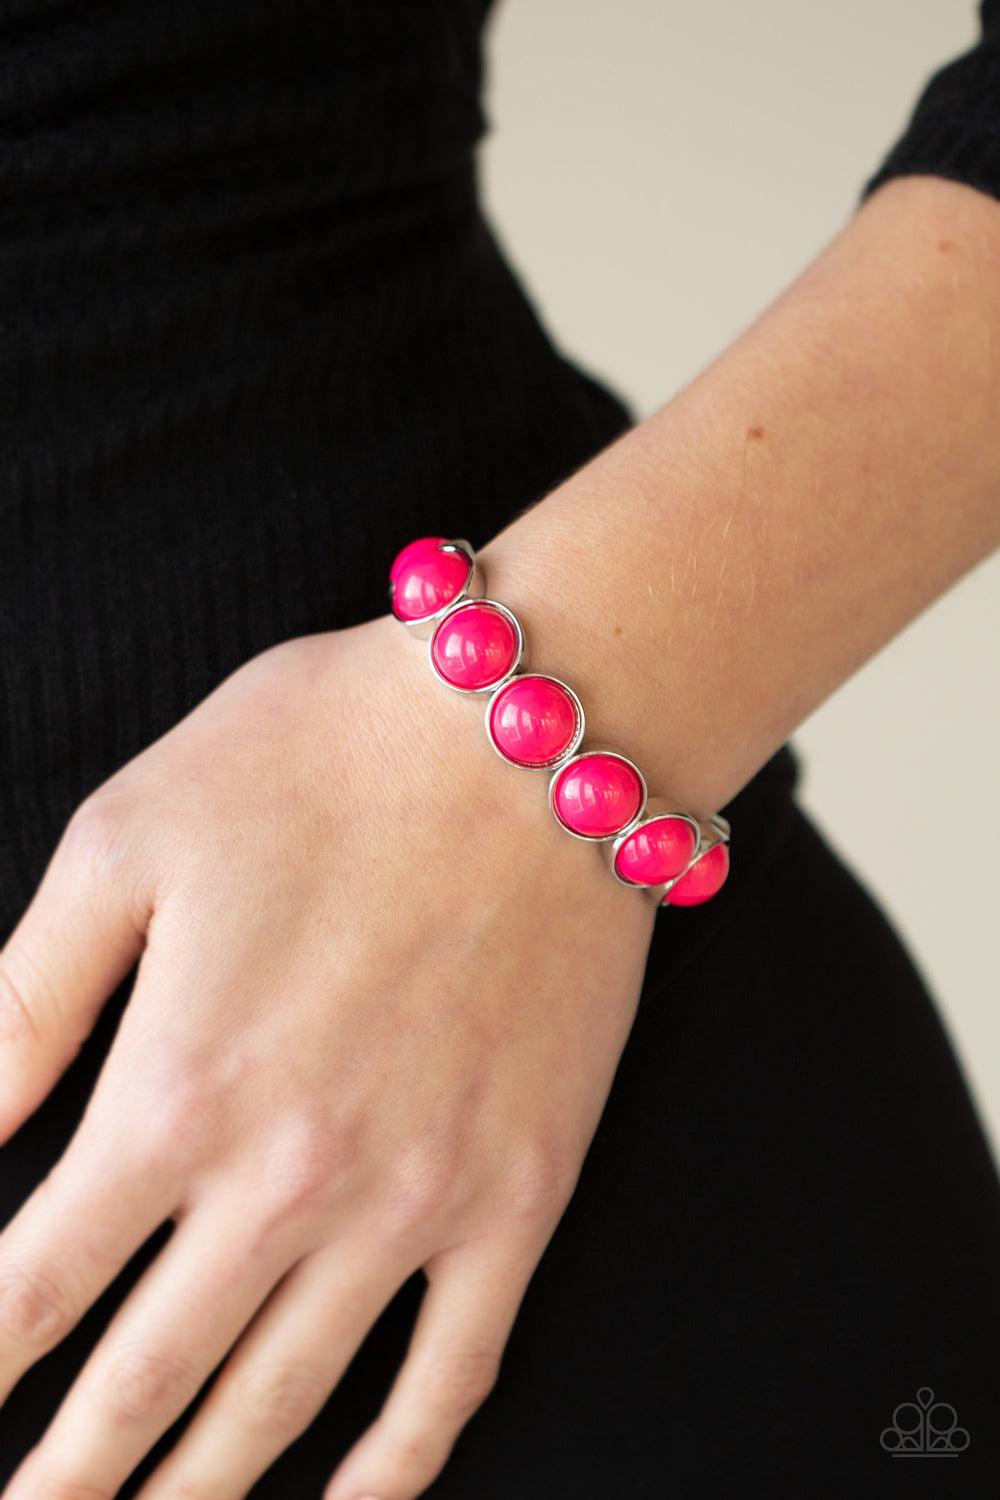 Paparazzi Accessories POP, Drop, and Roll - Pink Featuring flamboyant pink beaded centers, bubbly silver frames are threaded along stretchy bands around the wrist for a powerful pop of color. Sold as one individual bracelet. Jewelry